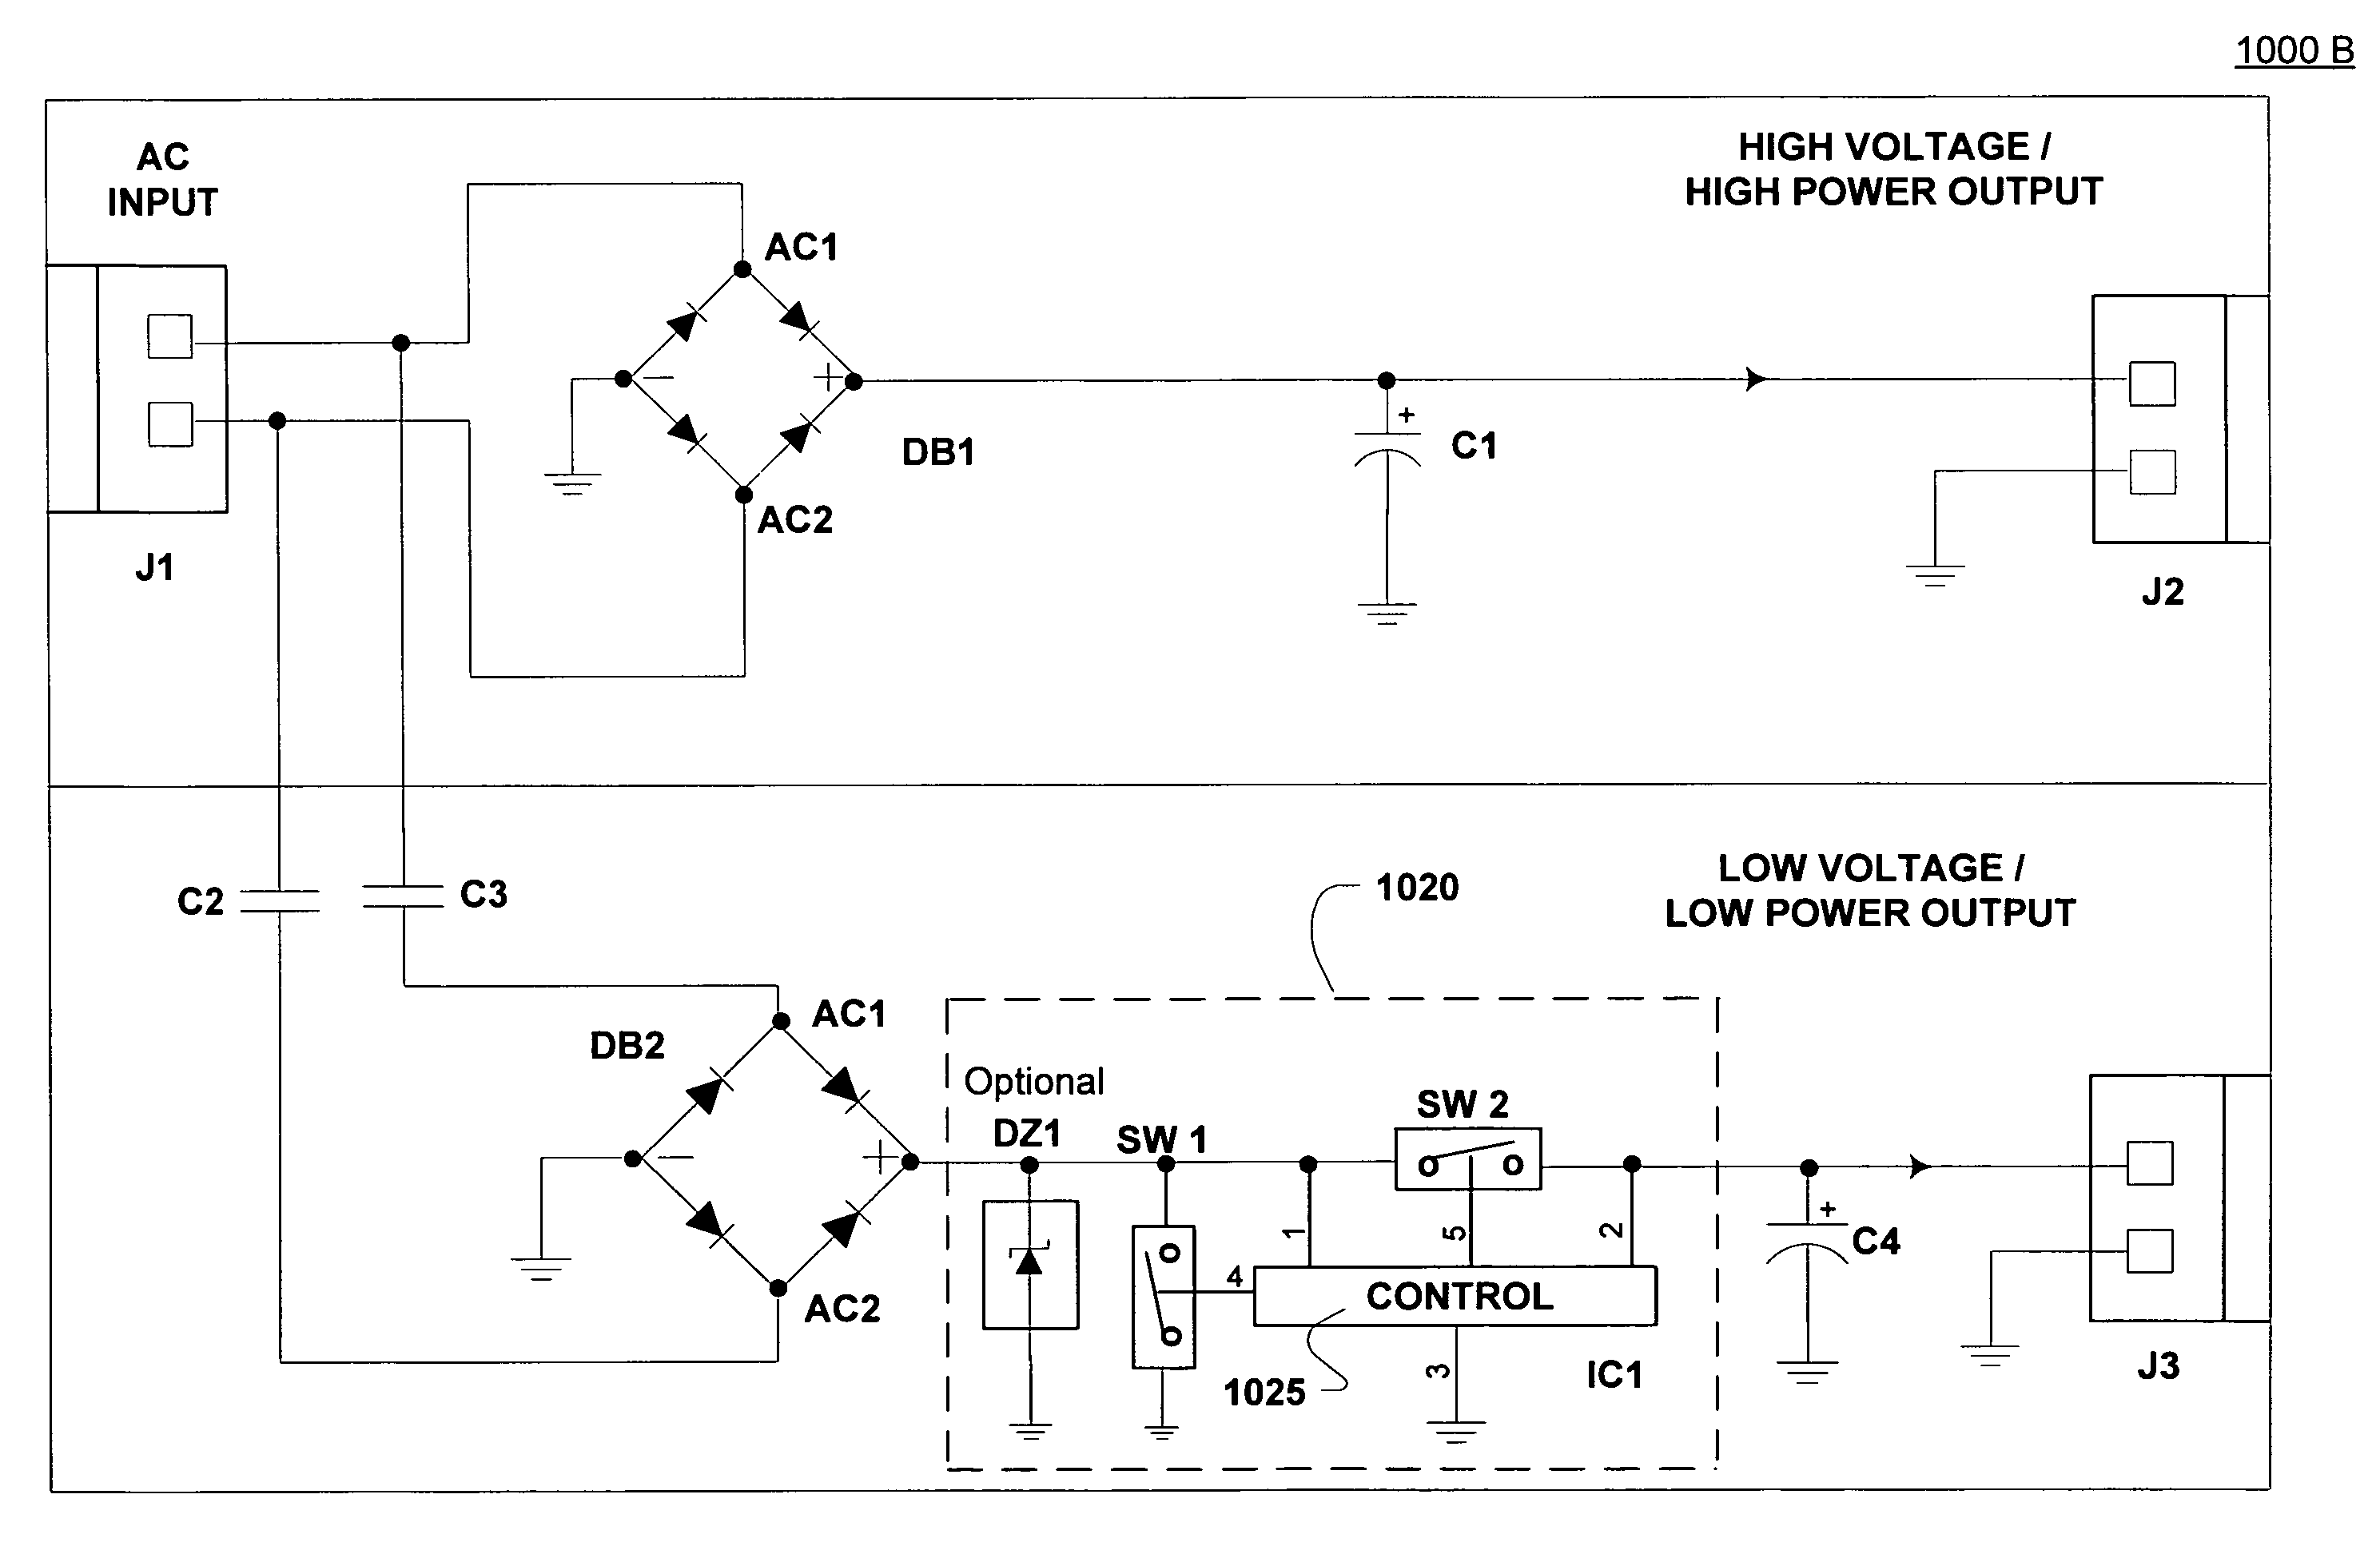 Power circuit for generating non-isolated low voltage power in a standby condition